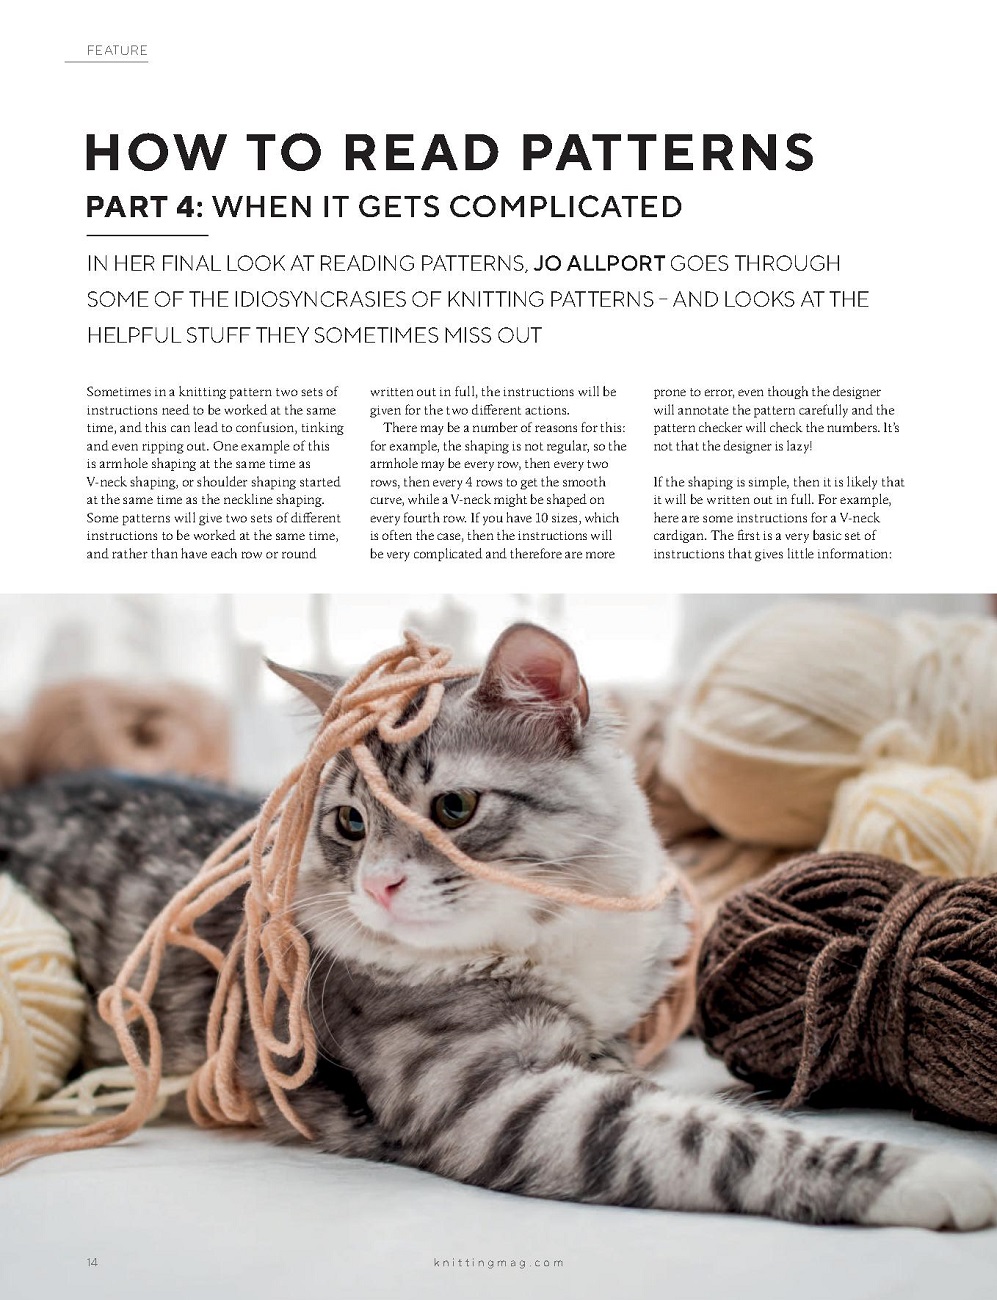 How to Read Complicated Patterns - Knitting Kingdom